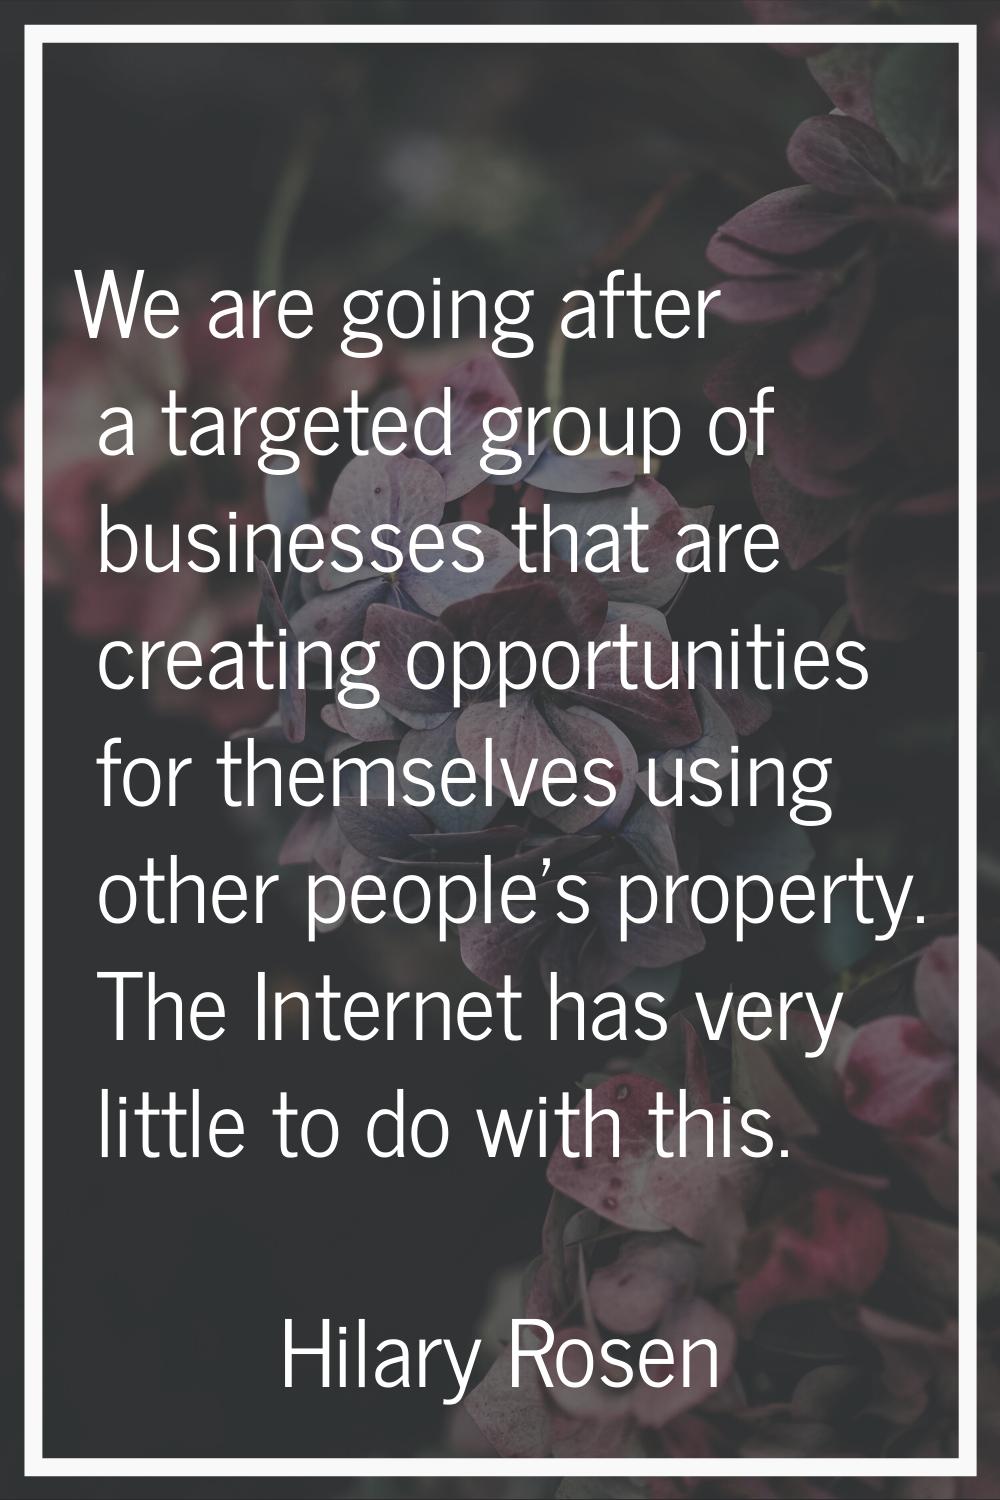 We are going after a targeted group of businesses that are creating opportunities for themselves us